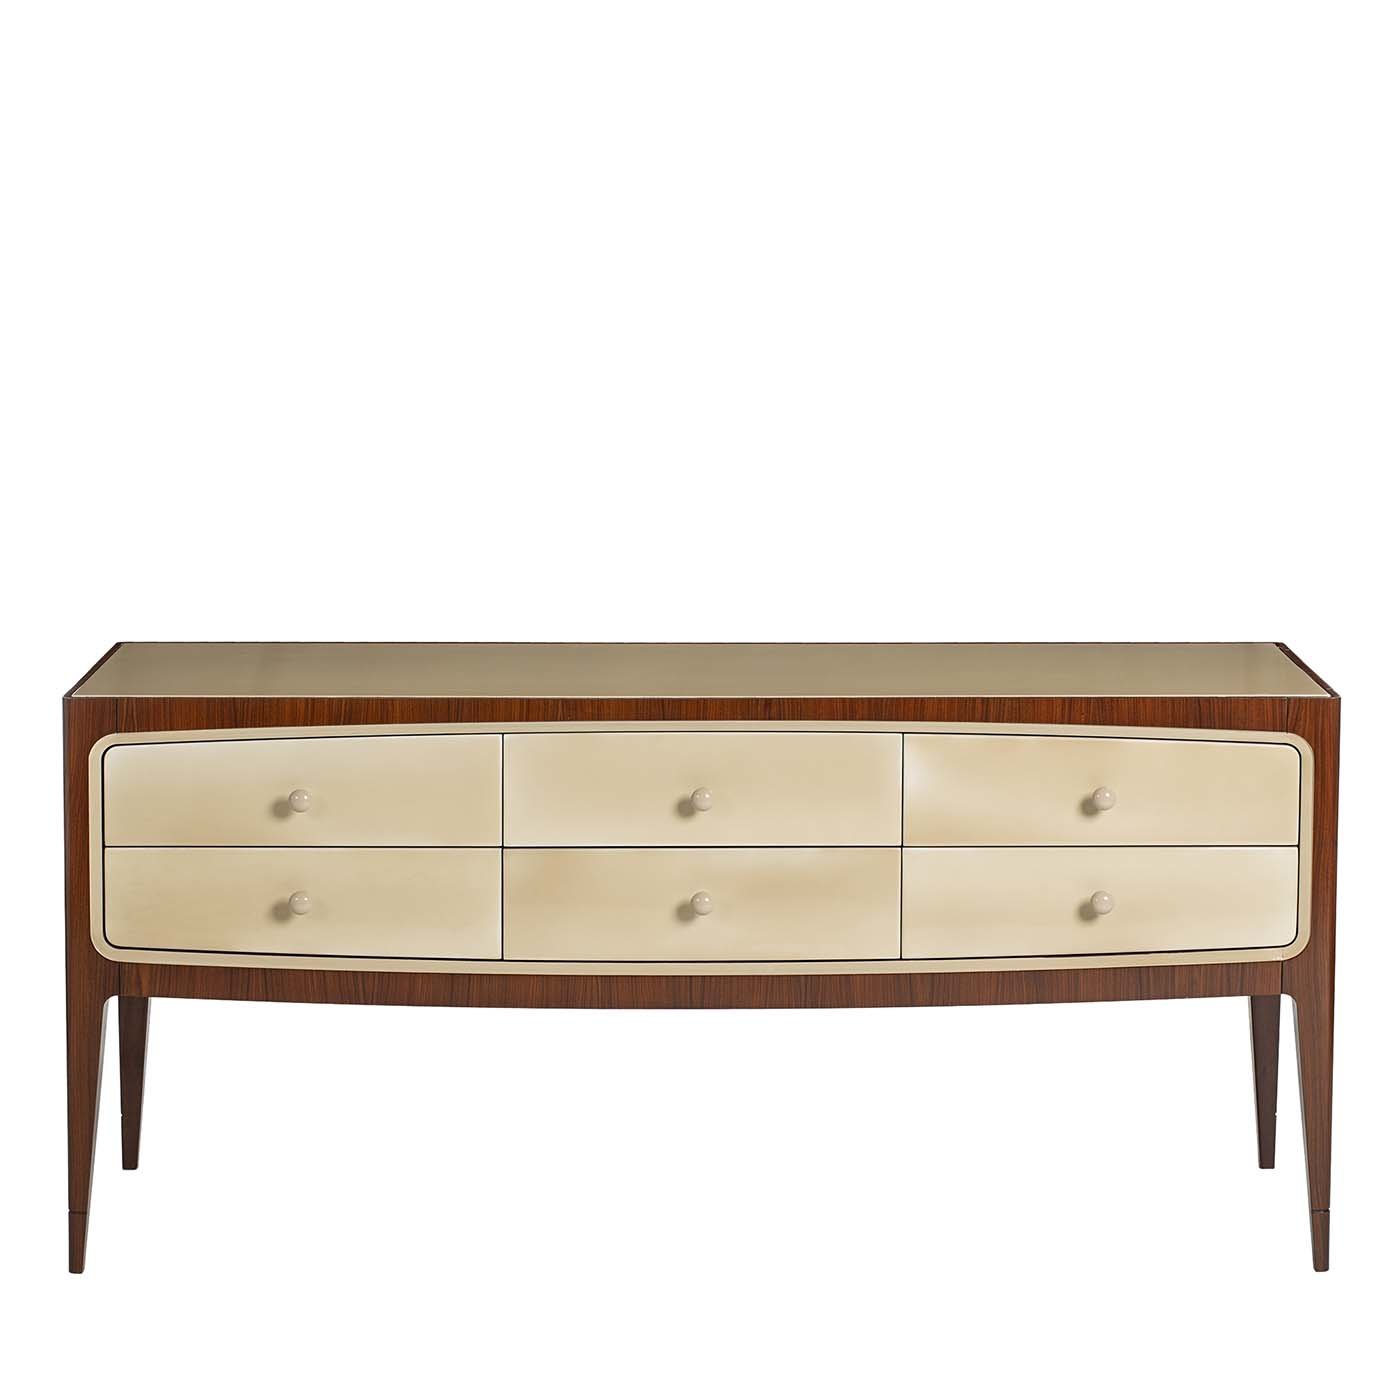 60s Style Beechwood Sideboard with Drawers 8712 - Main view